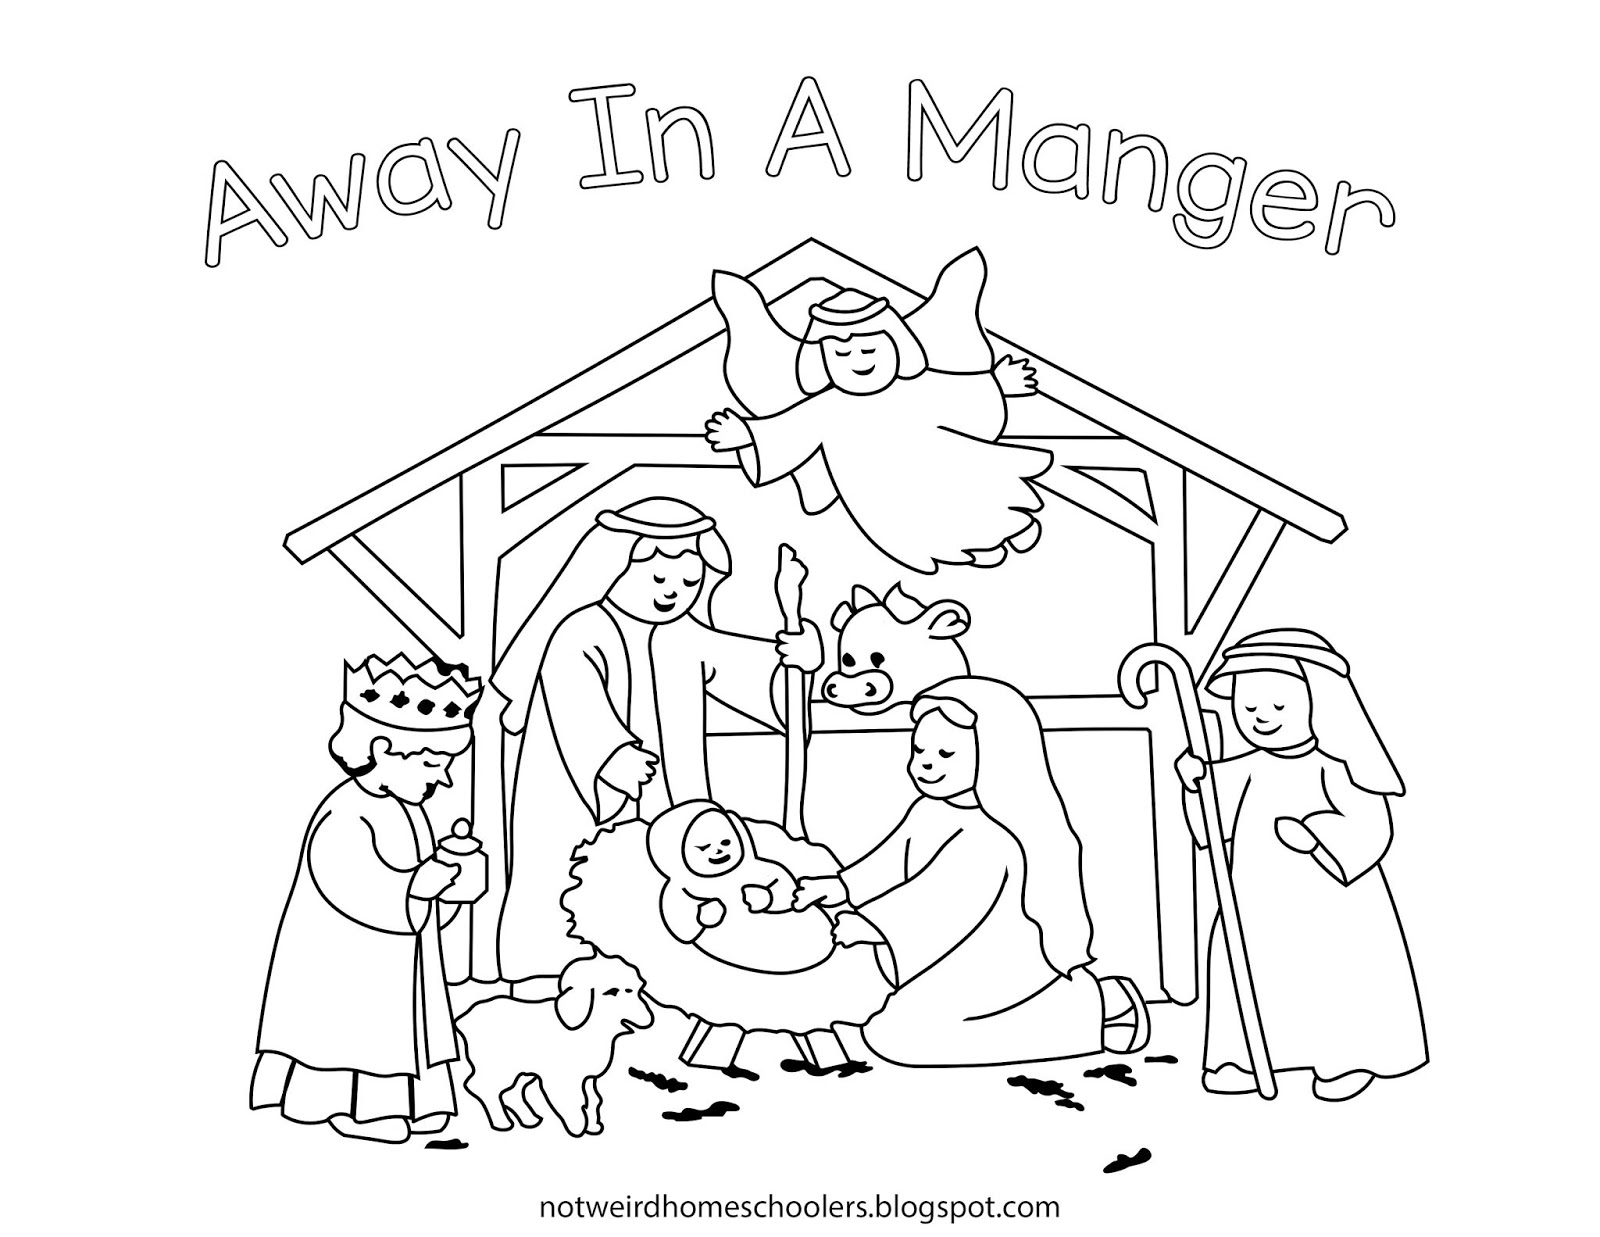 Download FREE HOMESCHOOLING RESOURCE!!! Nativity Scene Coloring Page